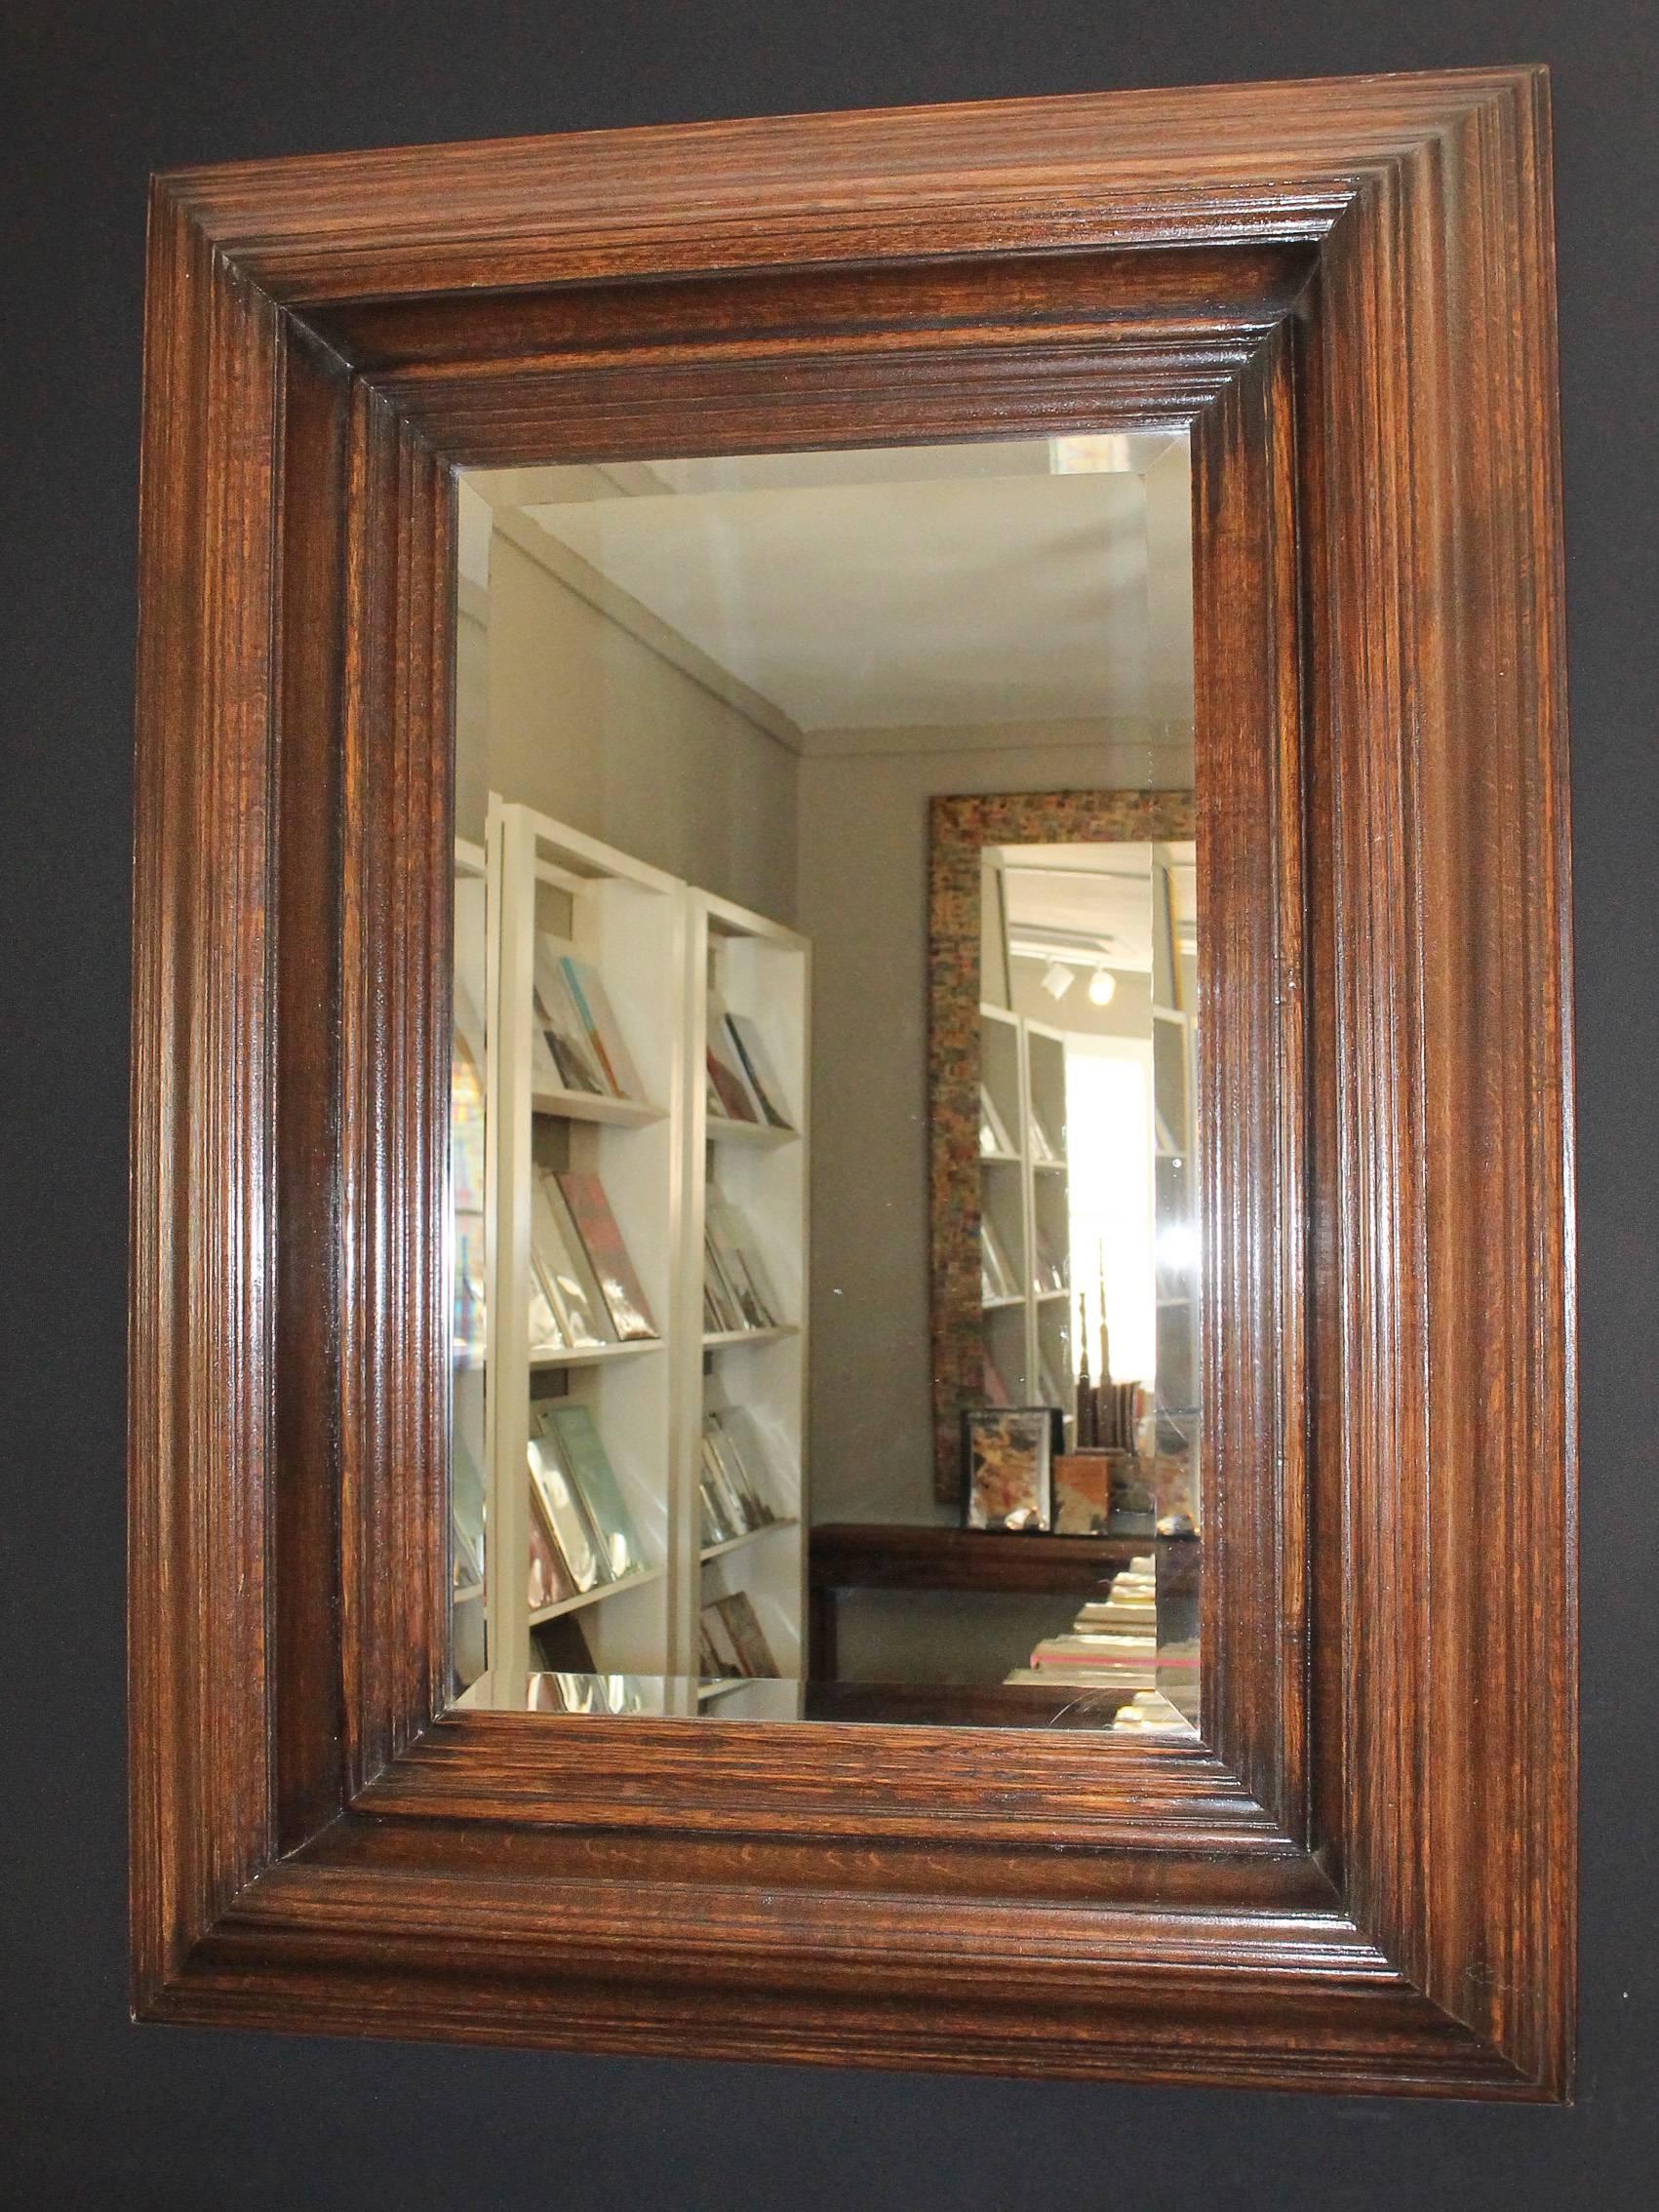 Magnificent 19th century oak framed mirror with impressive deep stepped moulding.